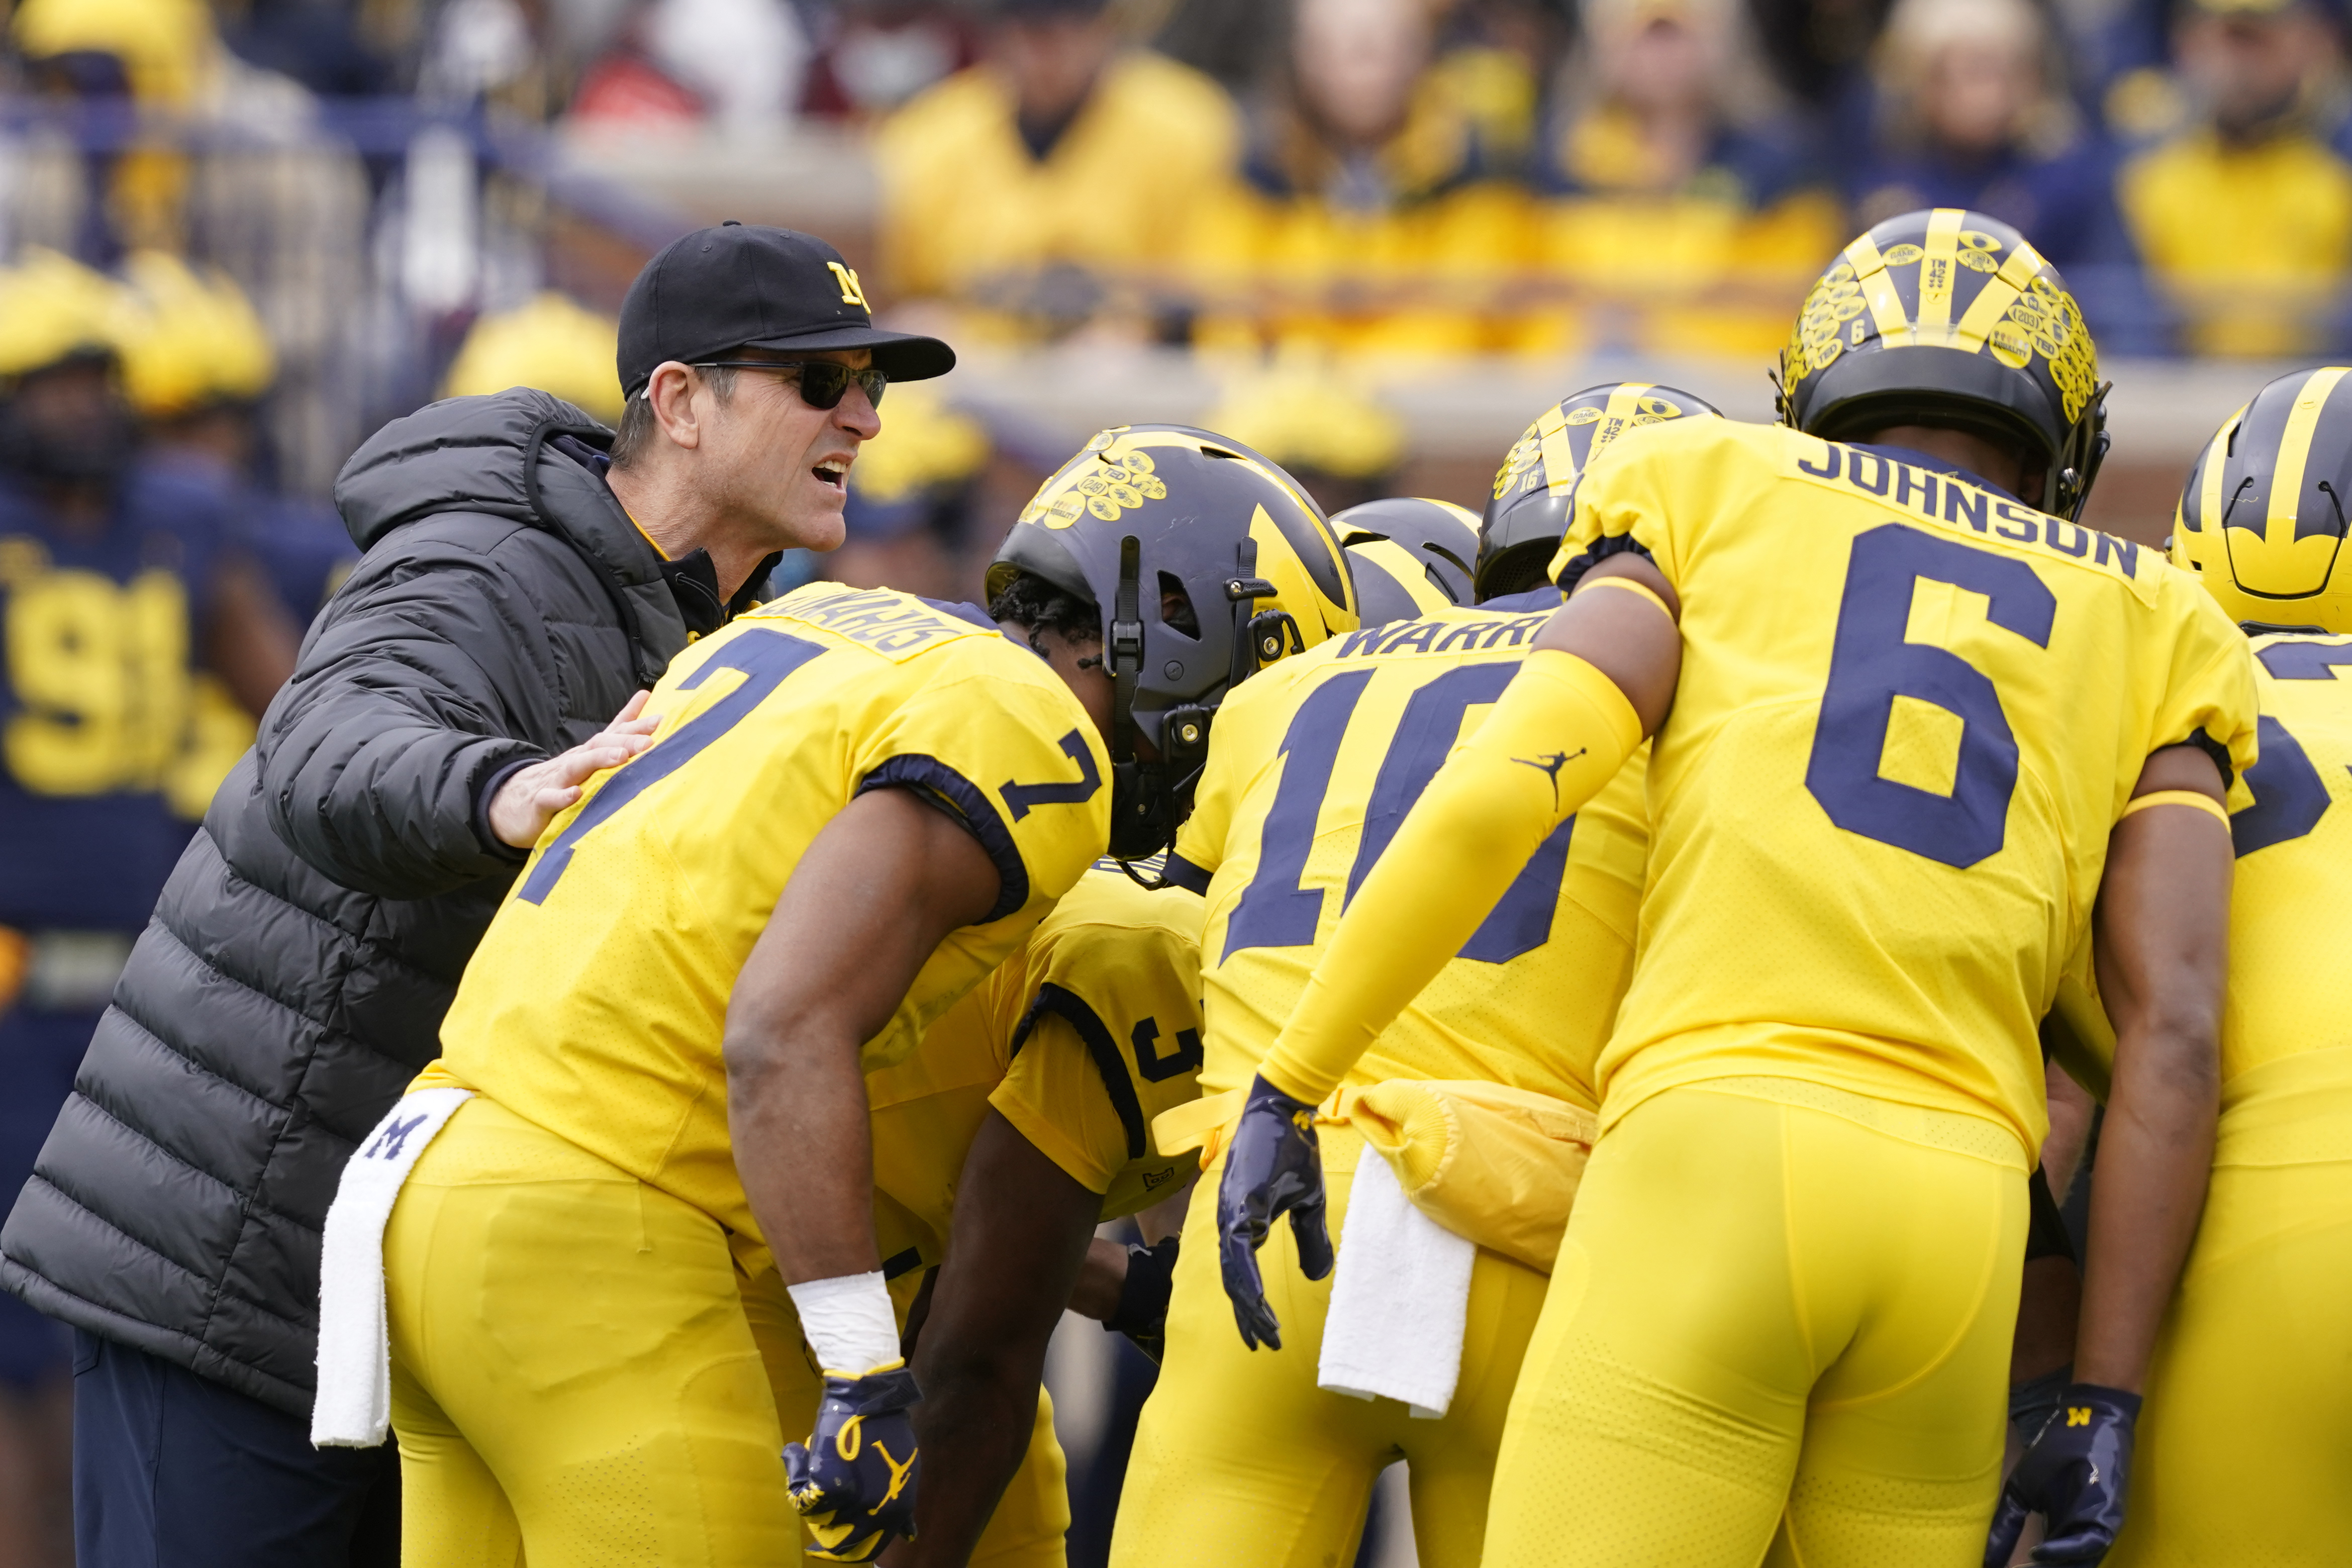 Jim Harbaugh's pay at Michigan topped $10 million in 2022 